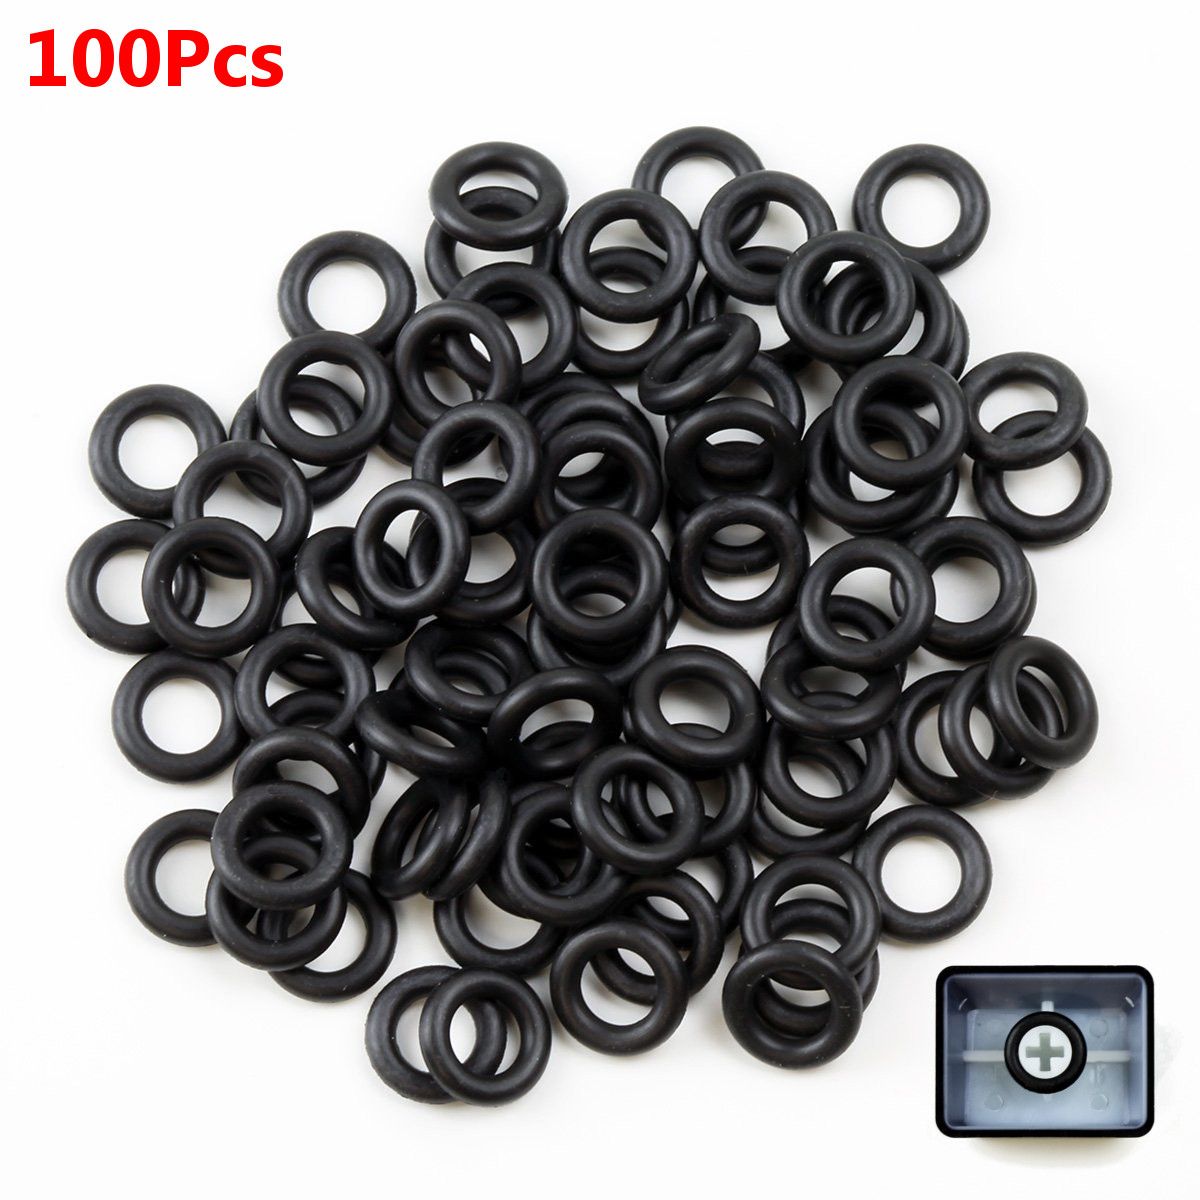 100-Mechanical-Keyboard-Keycap-Rubber-O-Ring-Switch-Dampeners-for-Cherry-MX-1187084